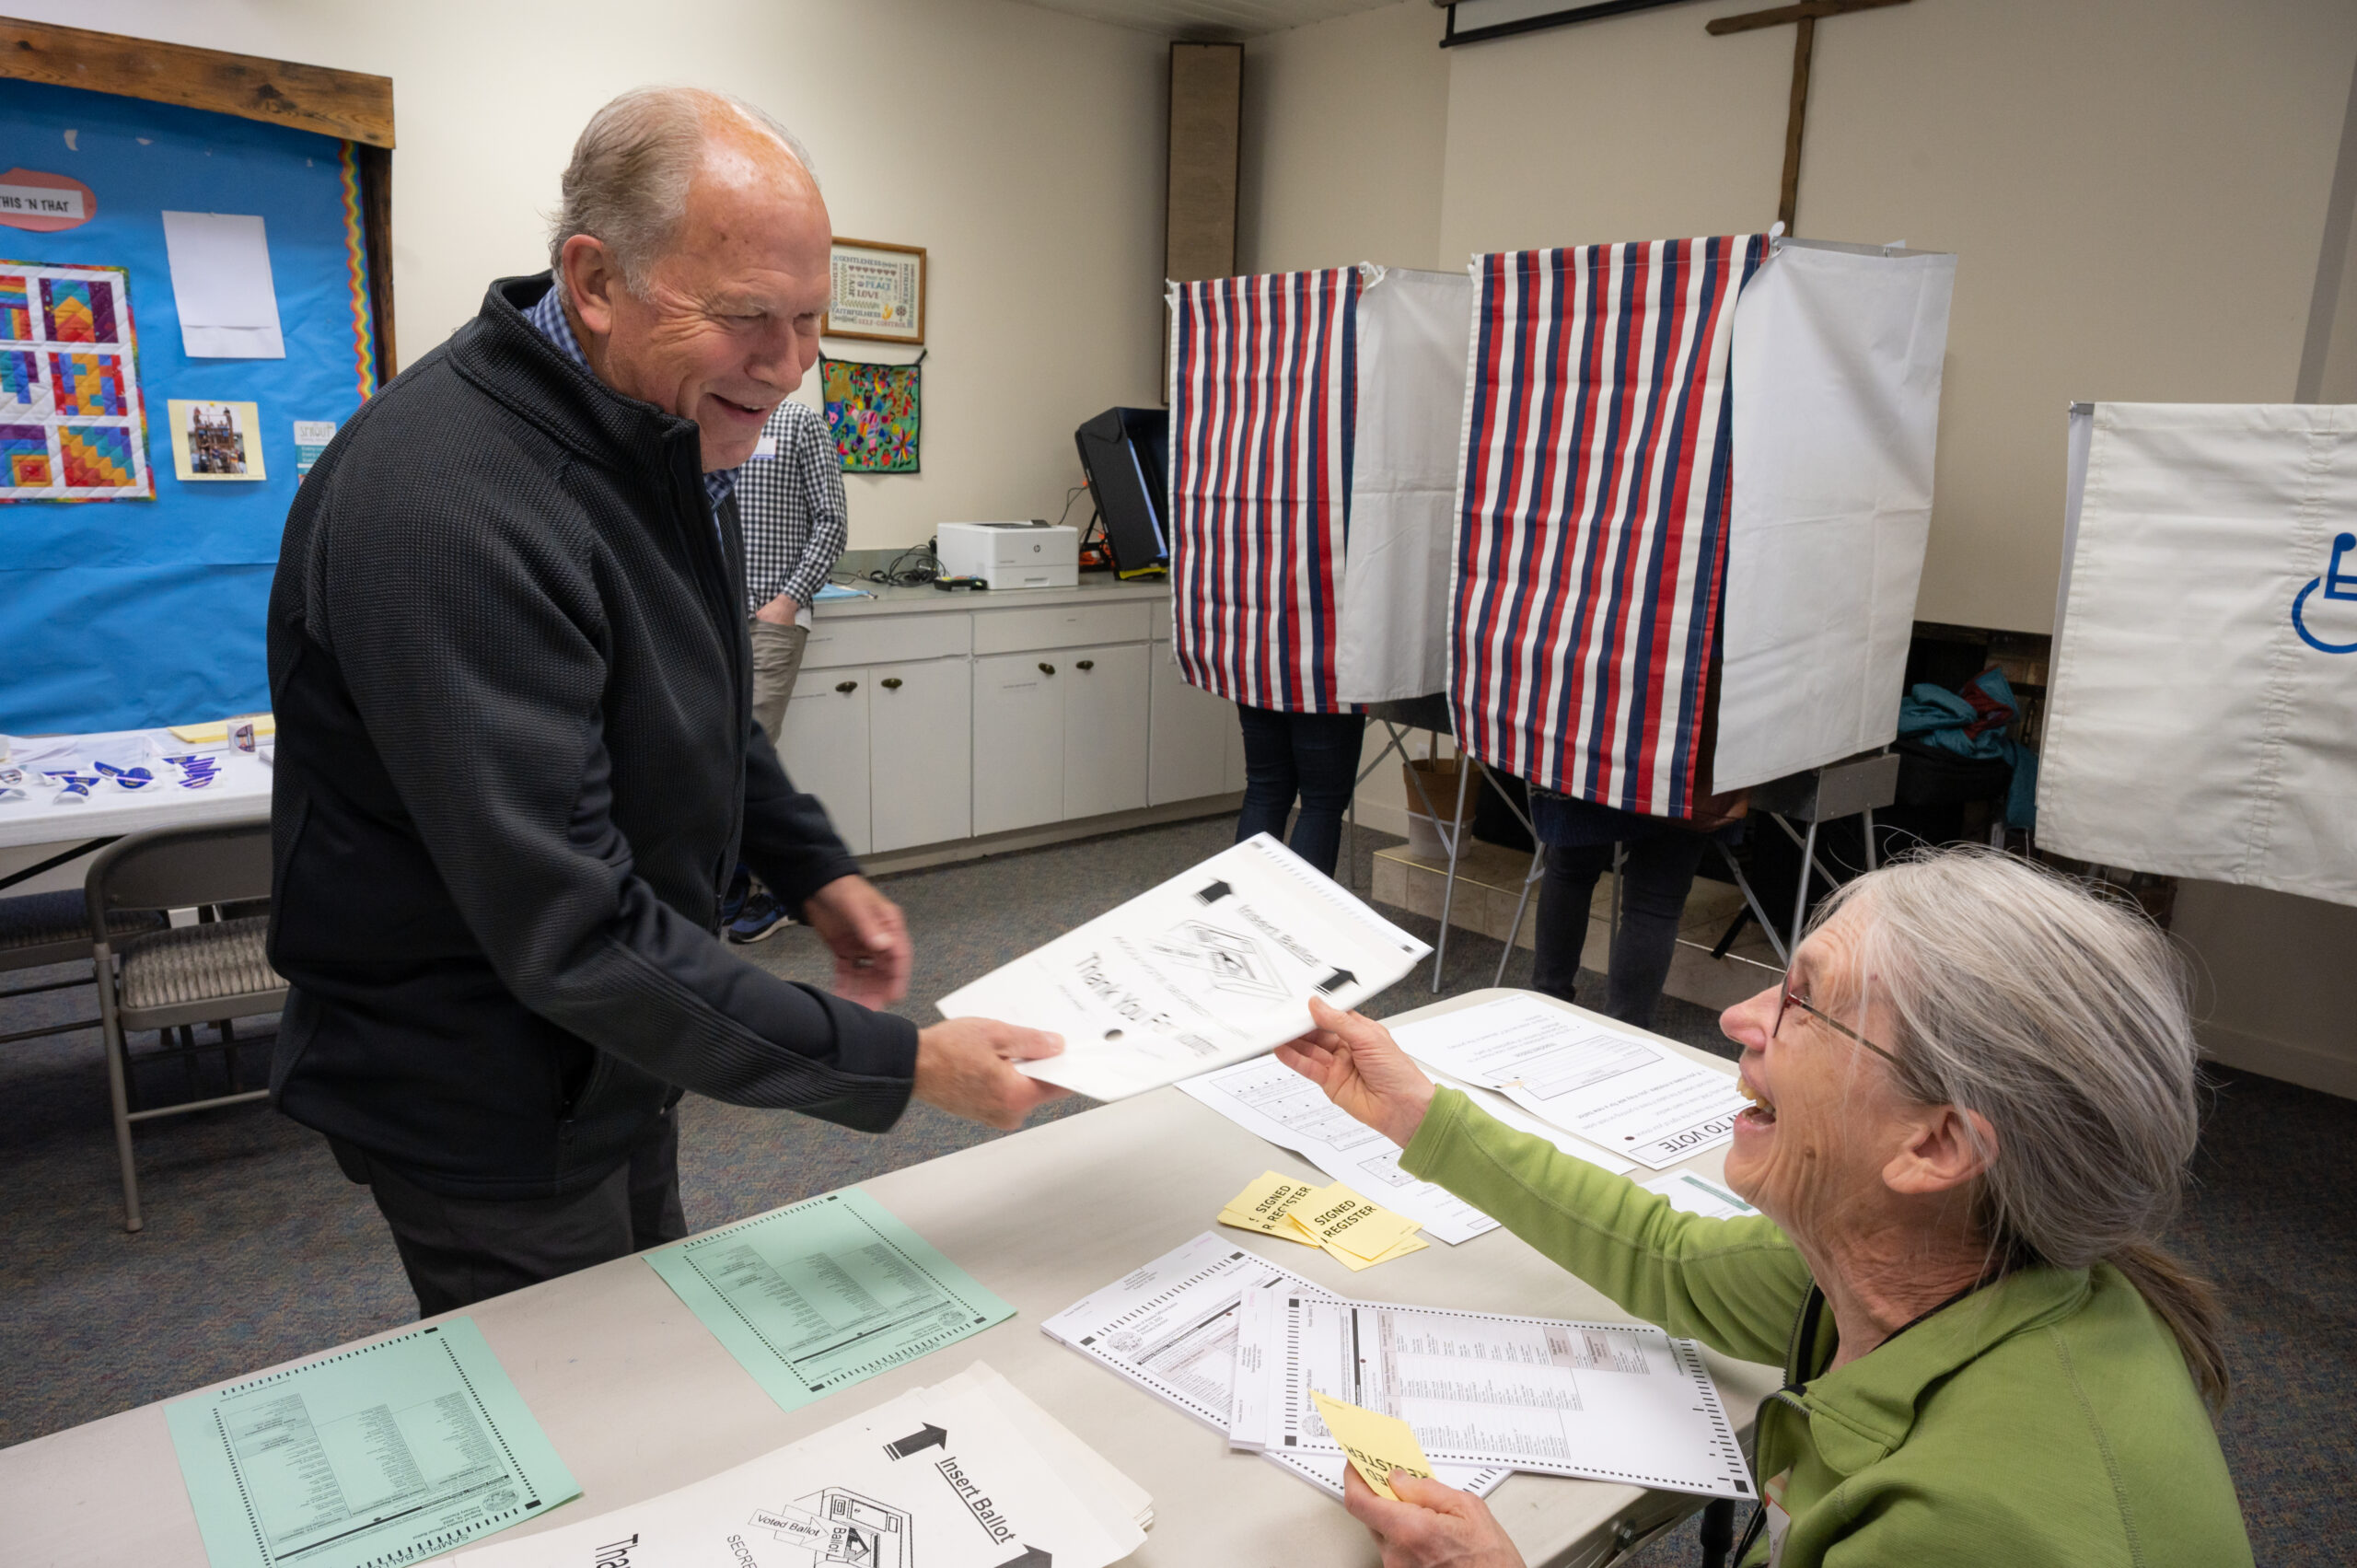 A man in a black coat receives a voting ballot from a woman in a green shirt.